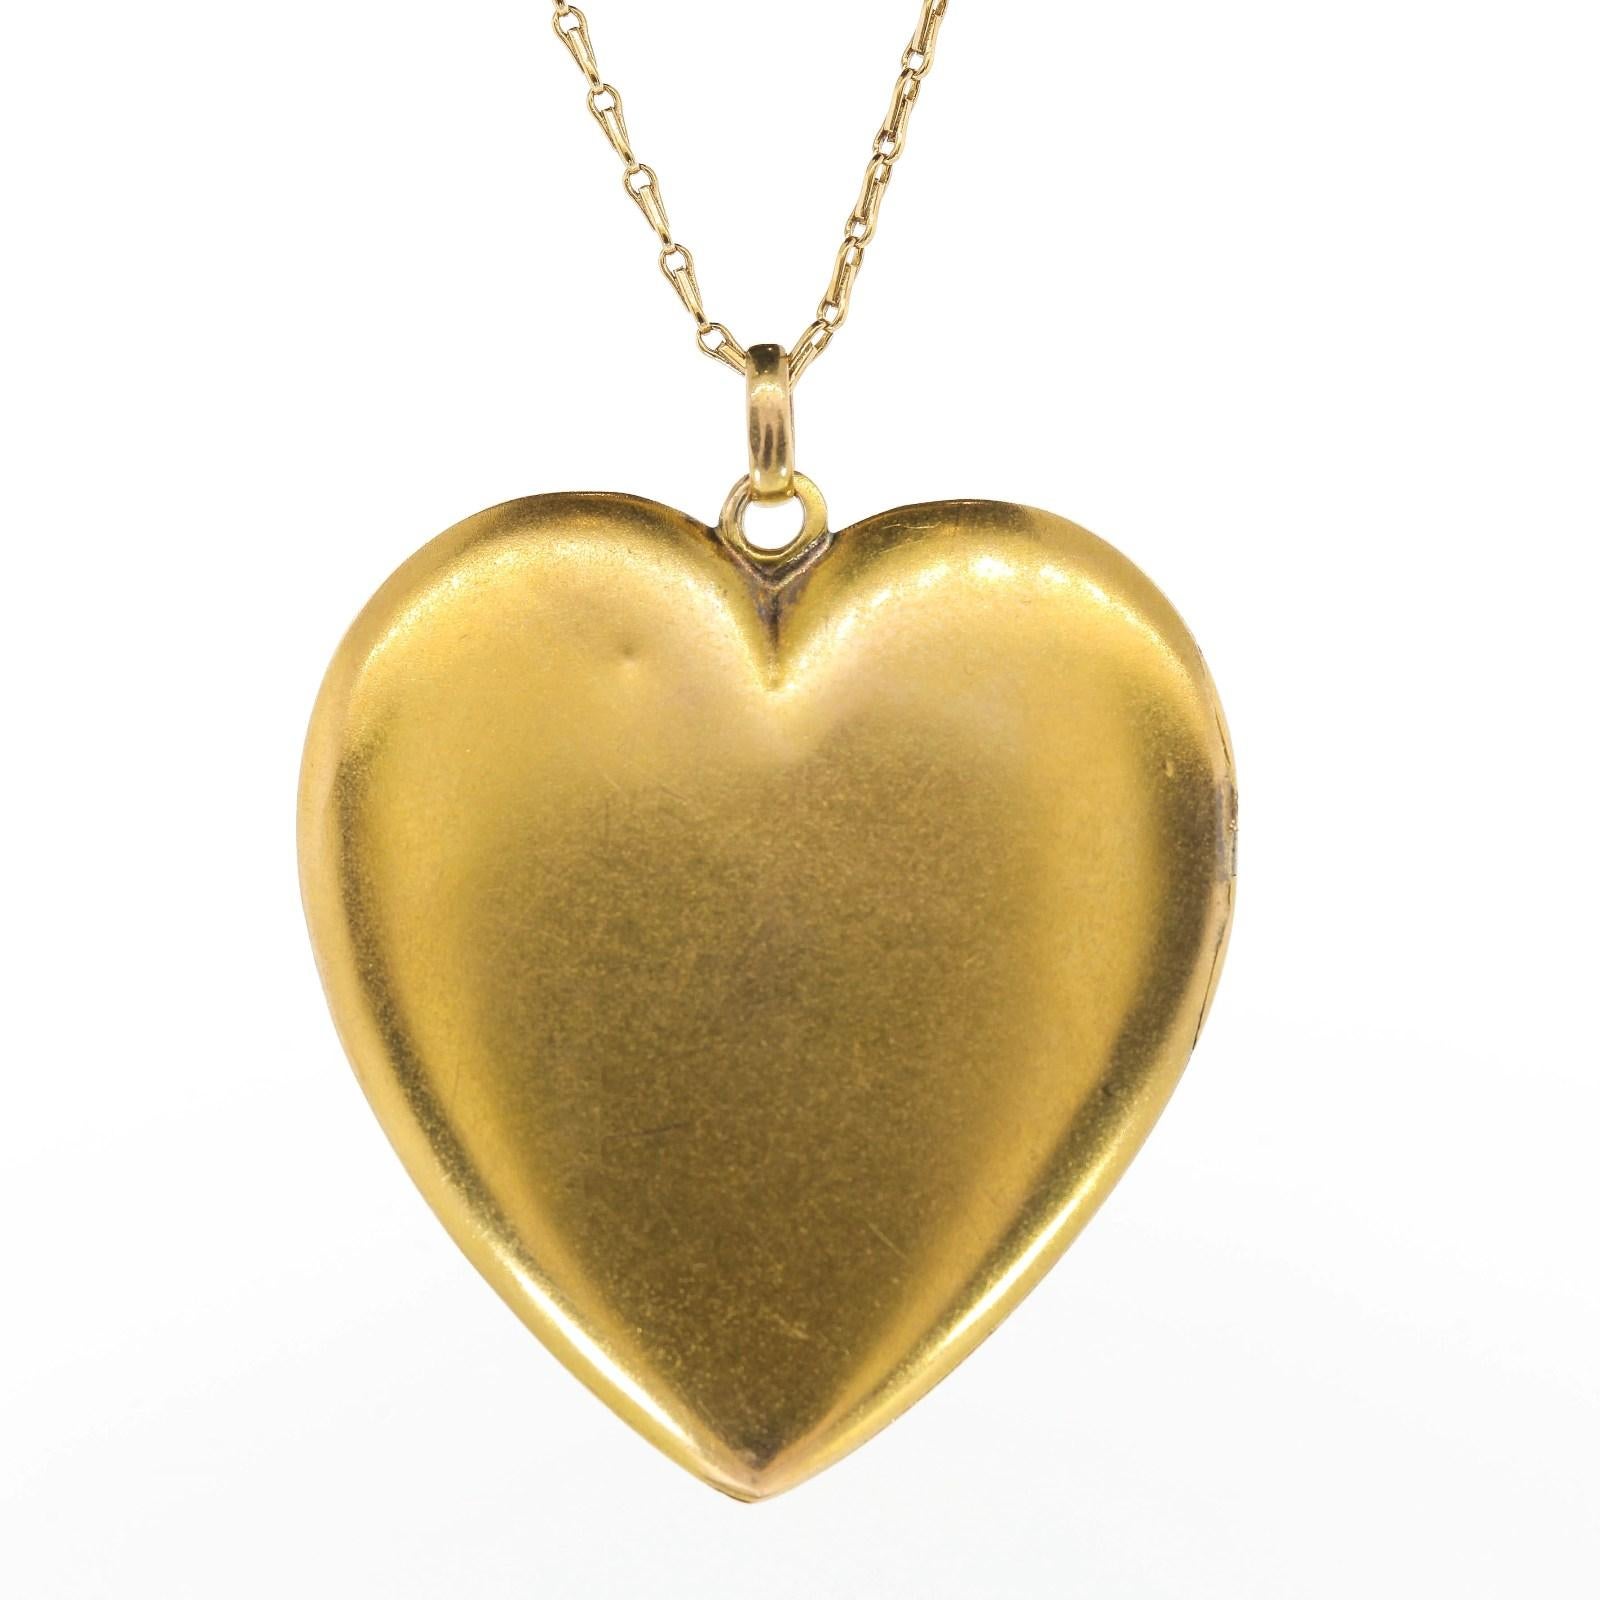 Understated beauty from circa 1900, this lovely locket created in 14KT yellow gold.  The heart locket is encrusted with nine Old Cut Diamonds placed in star settings, and it opens up to reveal two rose gold framed compartments; perfect to frame